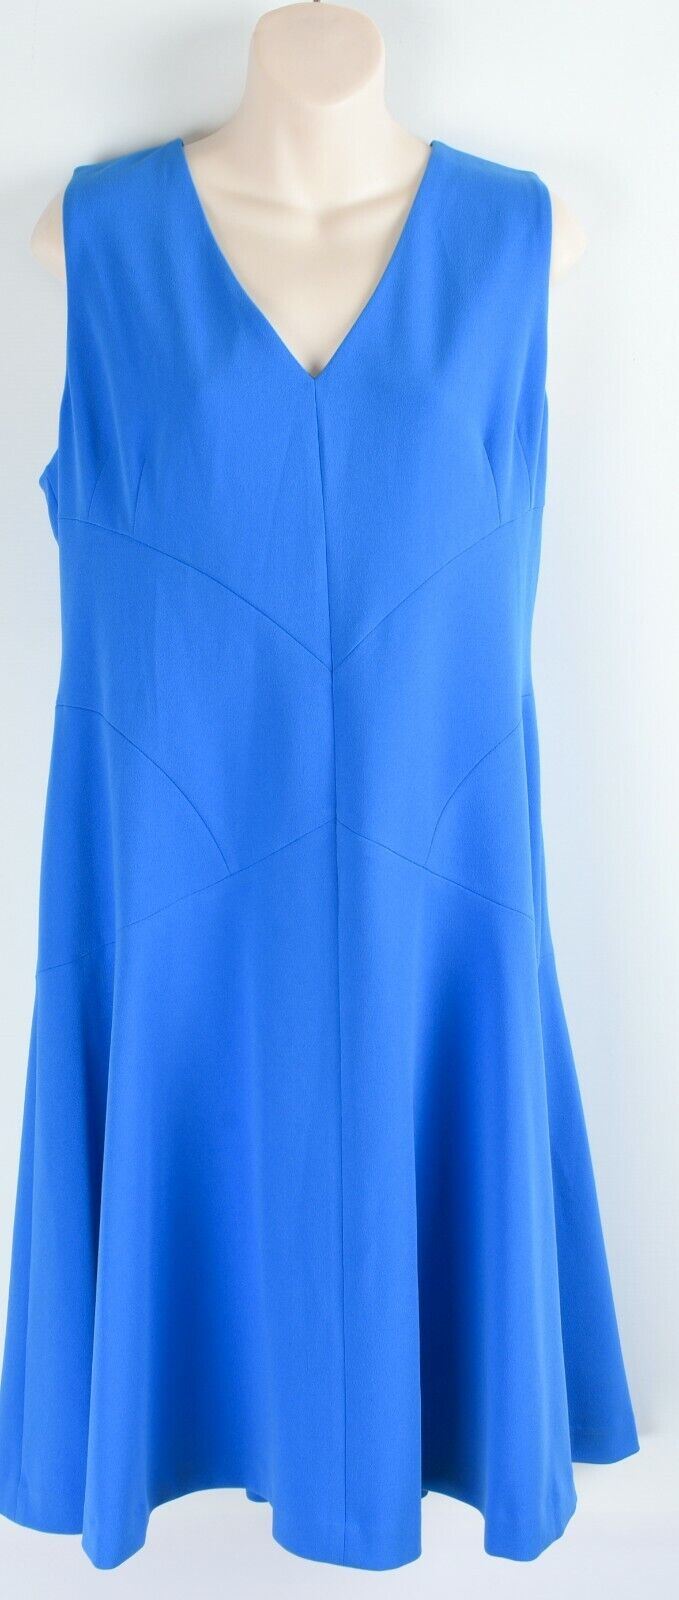 DKNY Women's Royal Blue Fit and Flare Dress, size UK 18